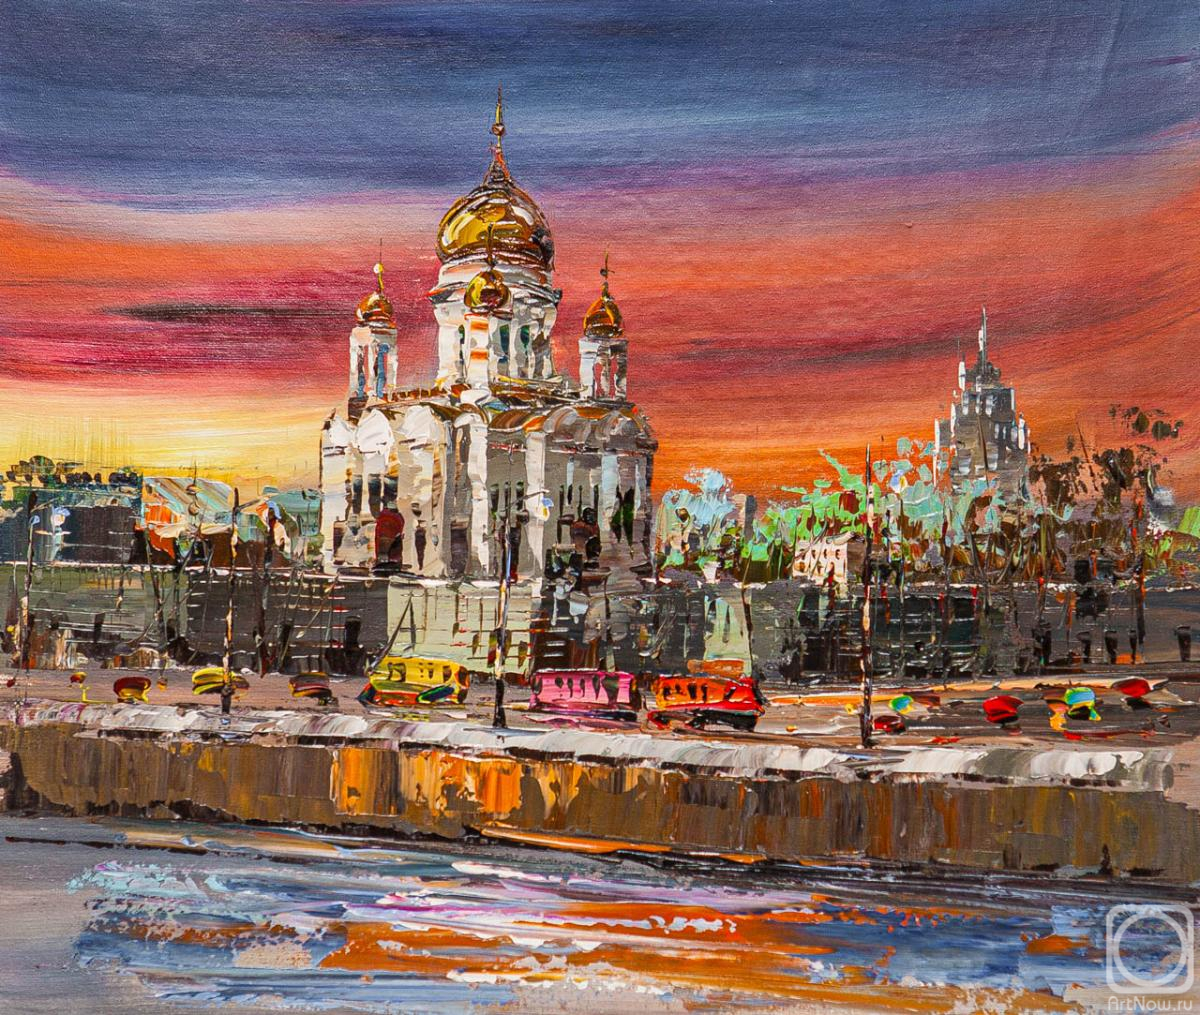 Rodries Jose. View of the Cathedral of Christ the Savior from the embankment